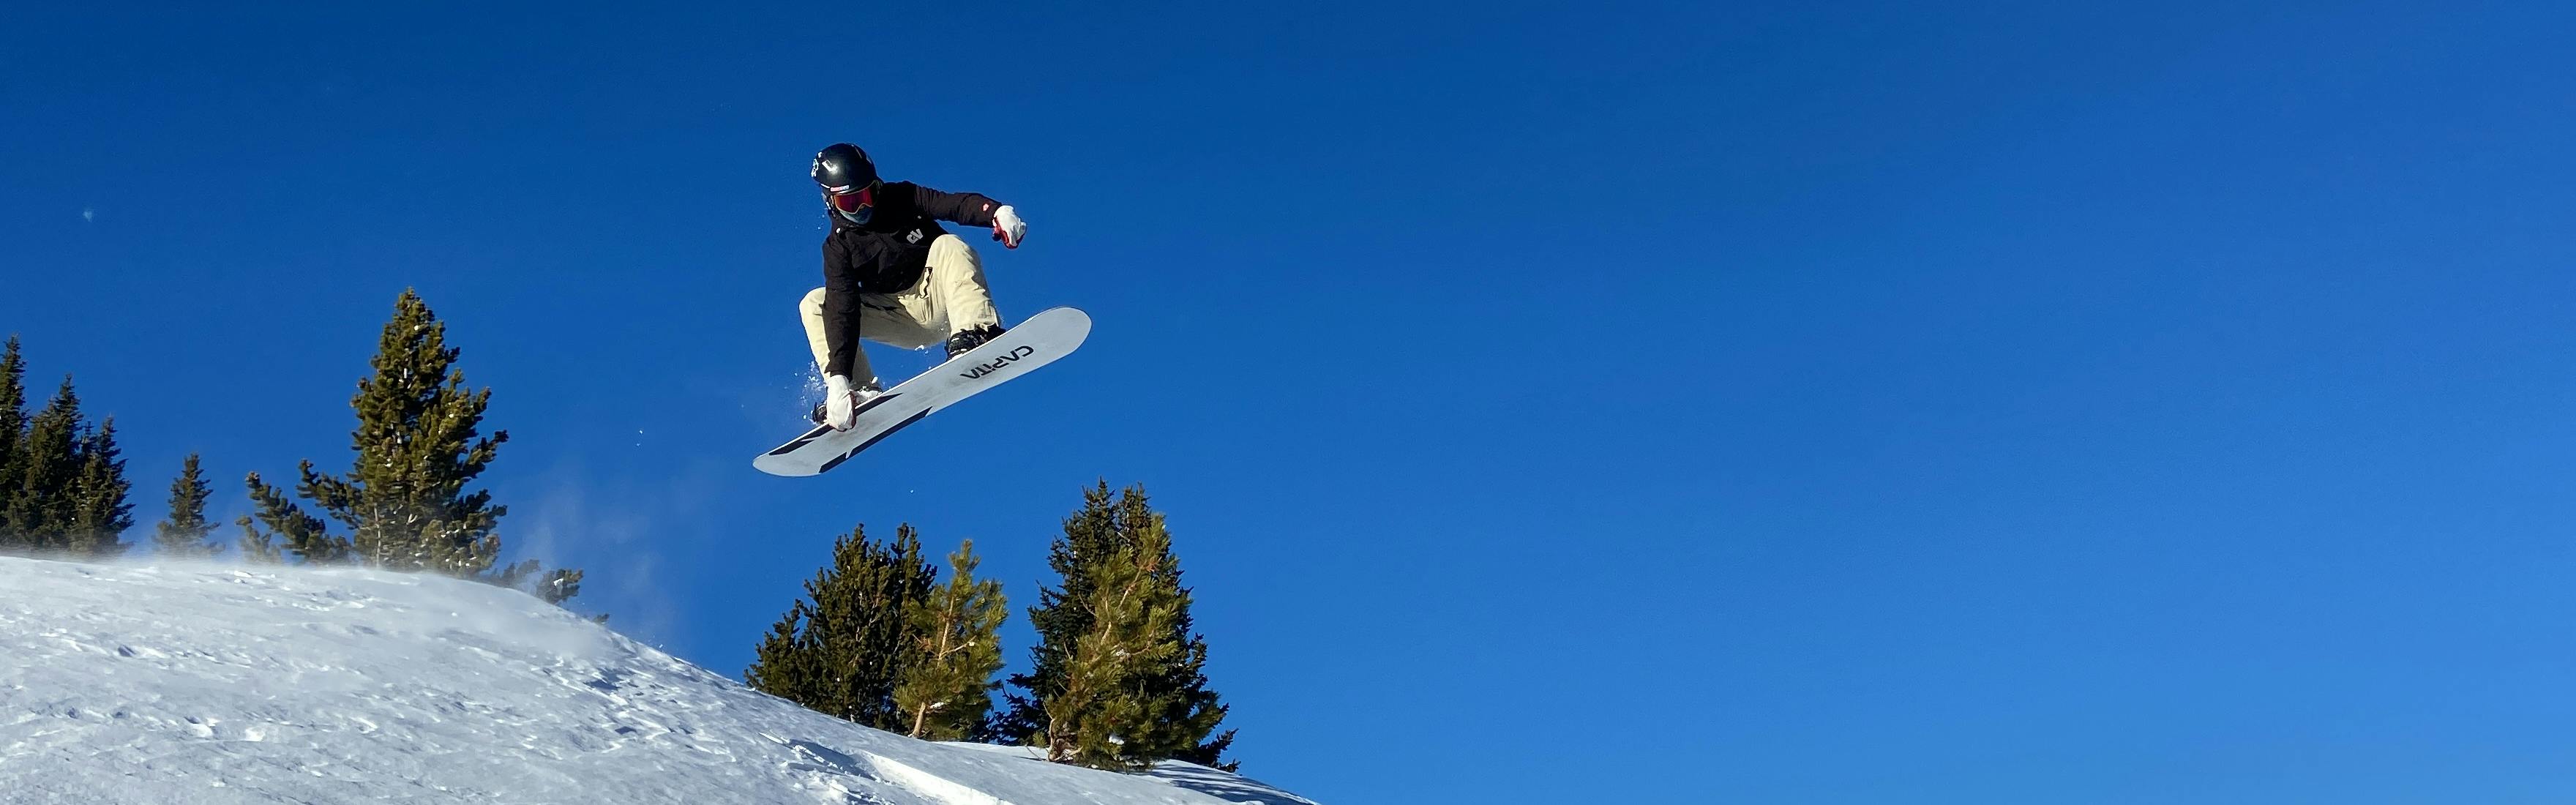 A man does a grab on a snowboard as he goes off a jump.